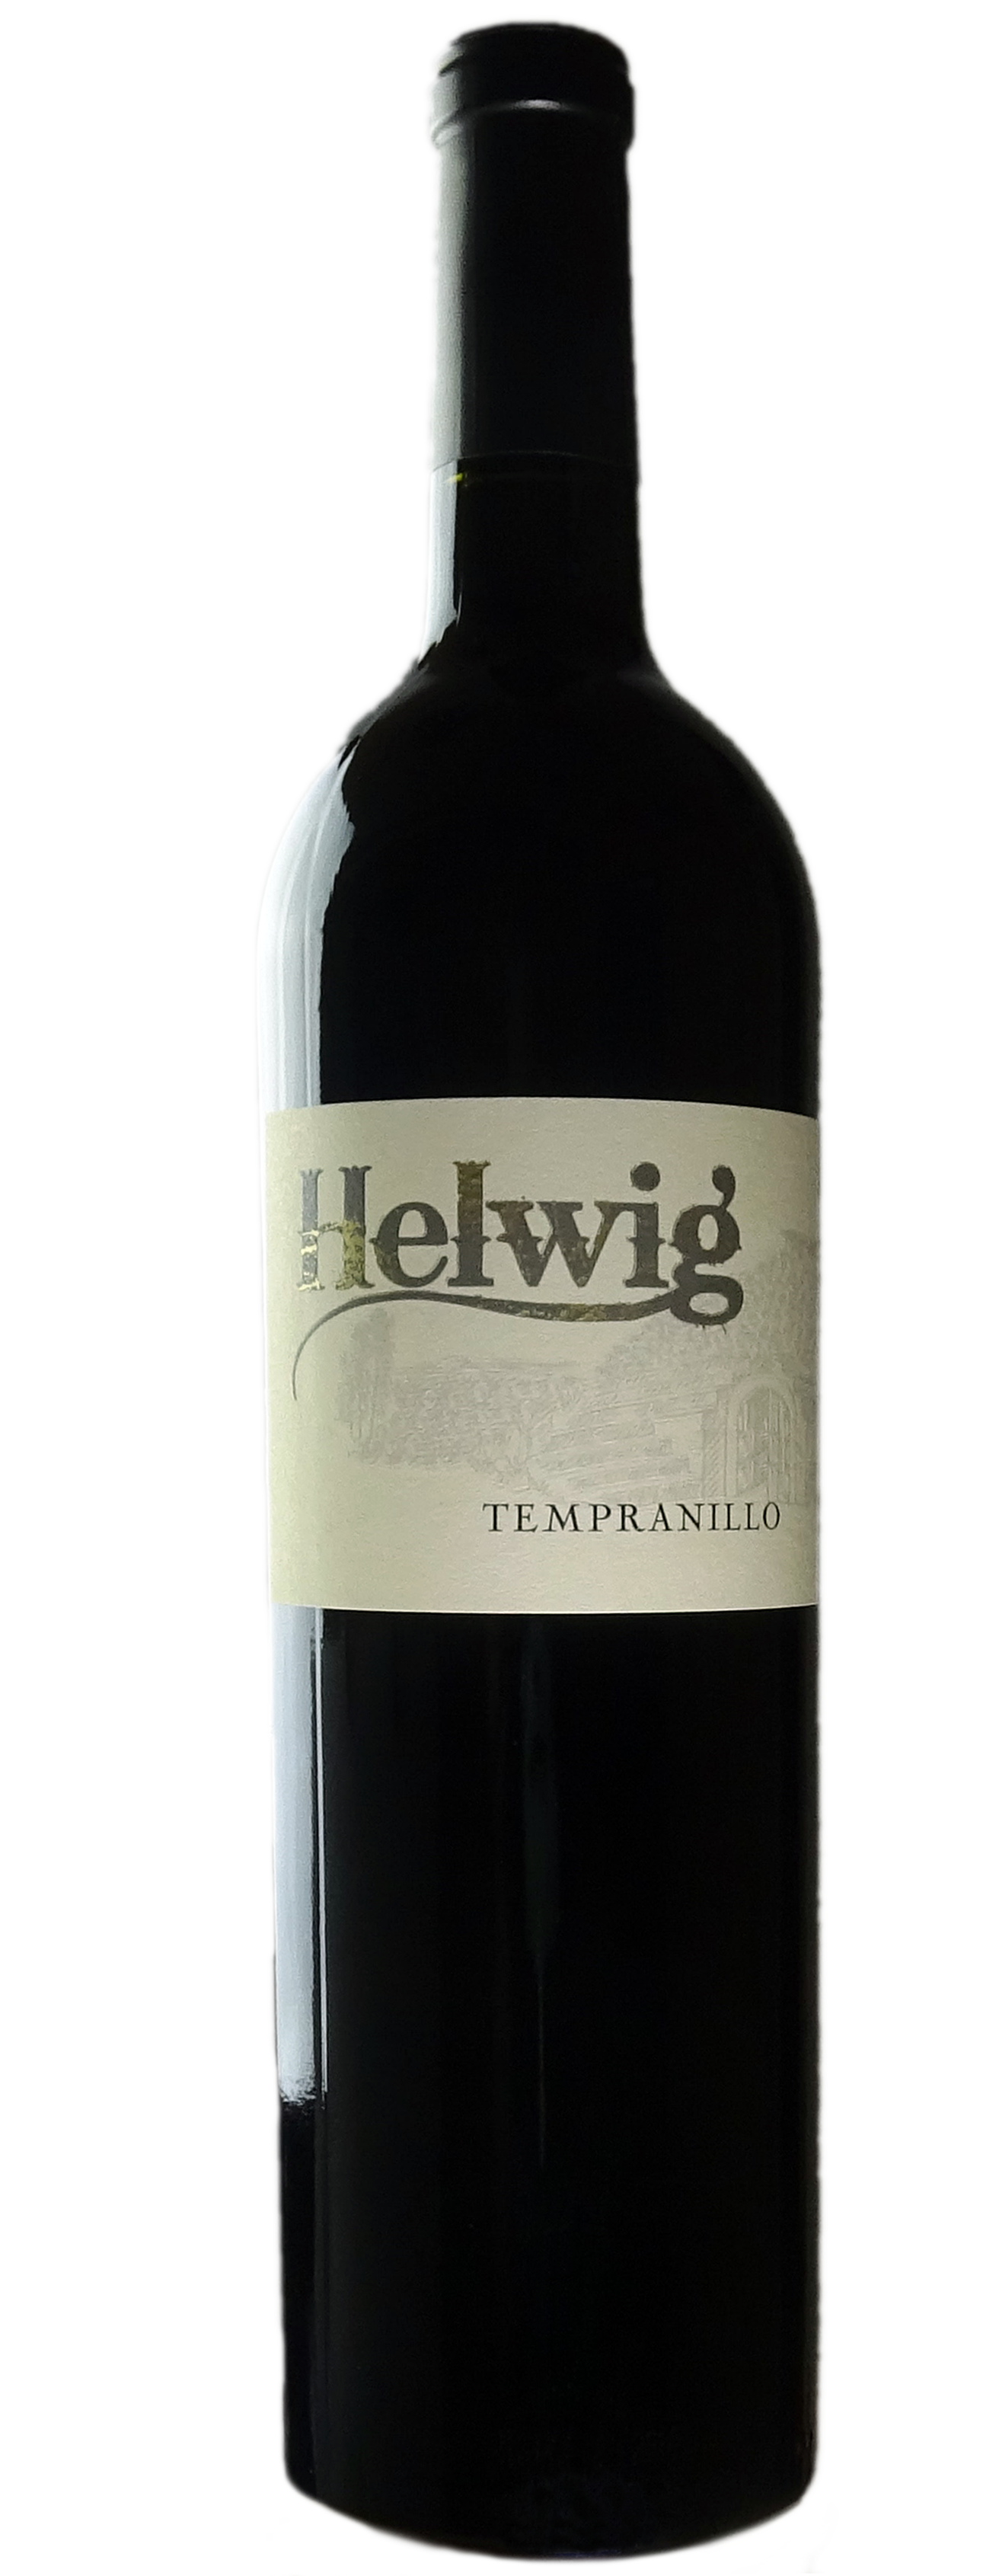 Product Image for Tempranillo '18